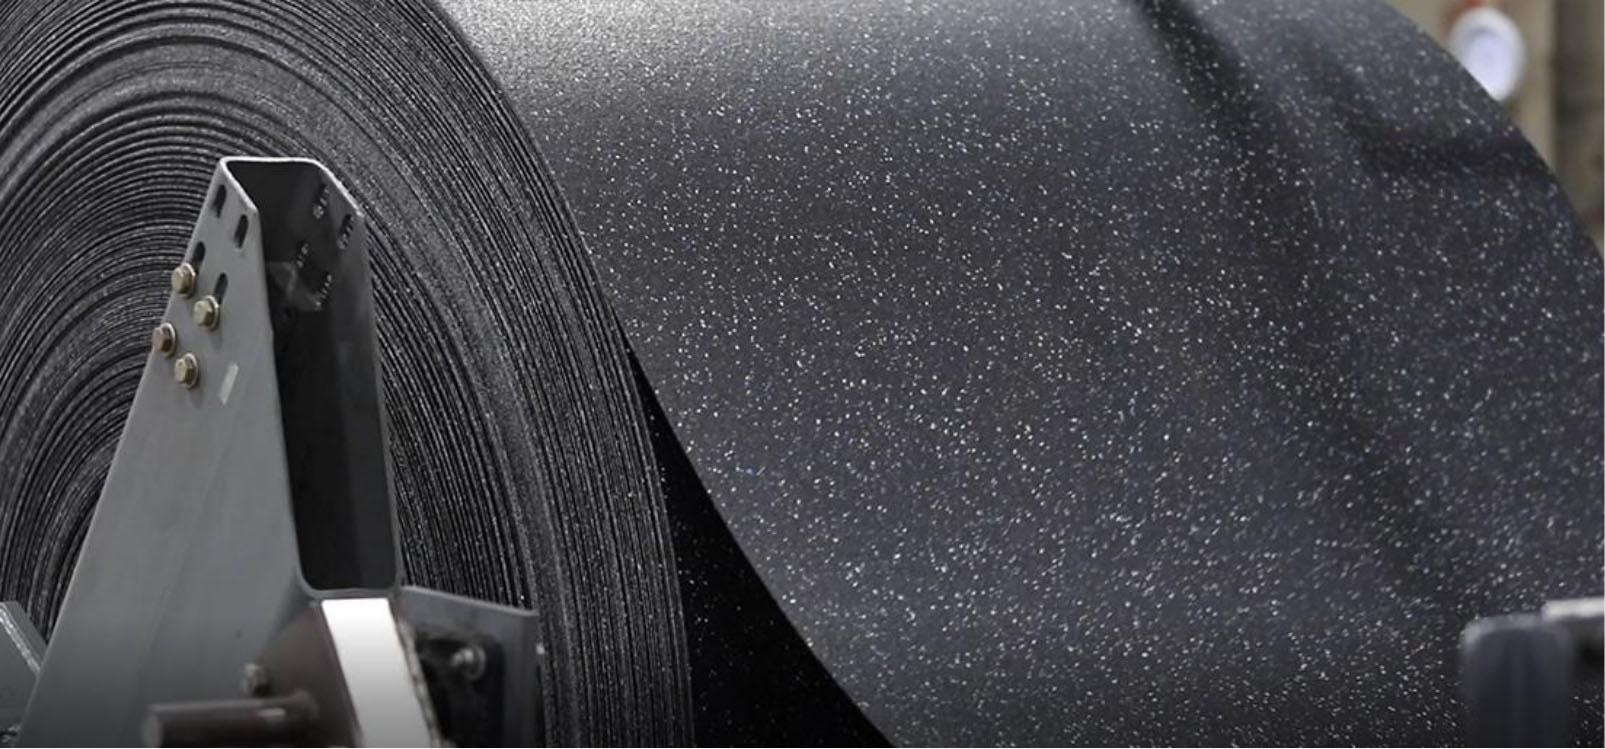 Close-up of a large roll of black rubber material used for industrial purposes, showing texture and speckled design.